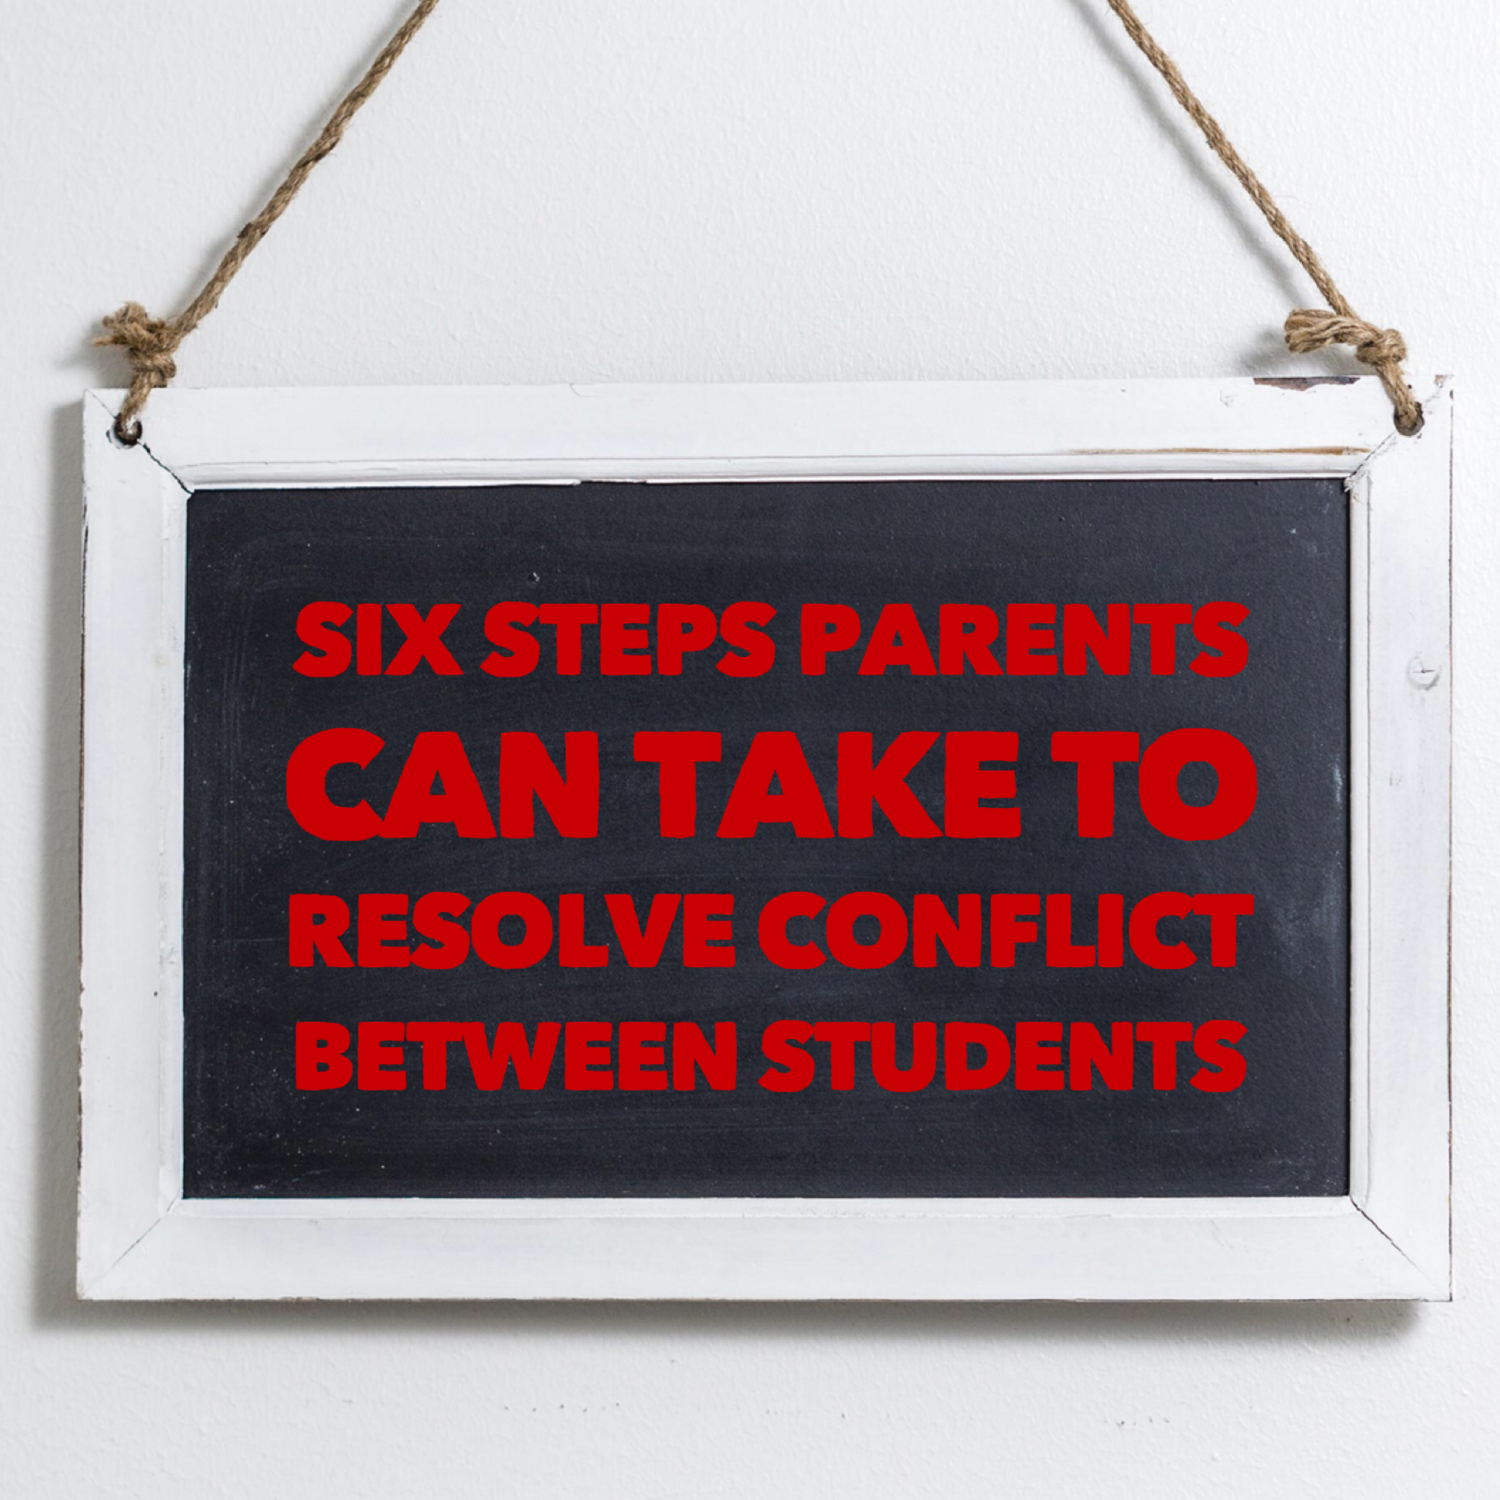 6 Steps Parents Can Take to Resolve Conflict Between Students - Griffin Education Enterprises